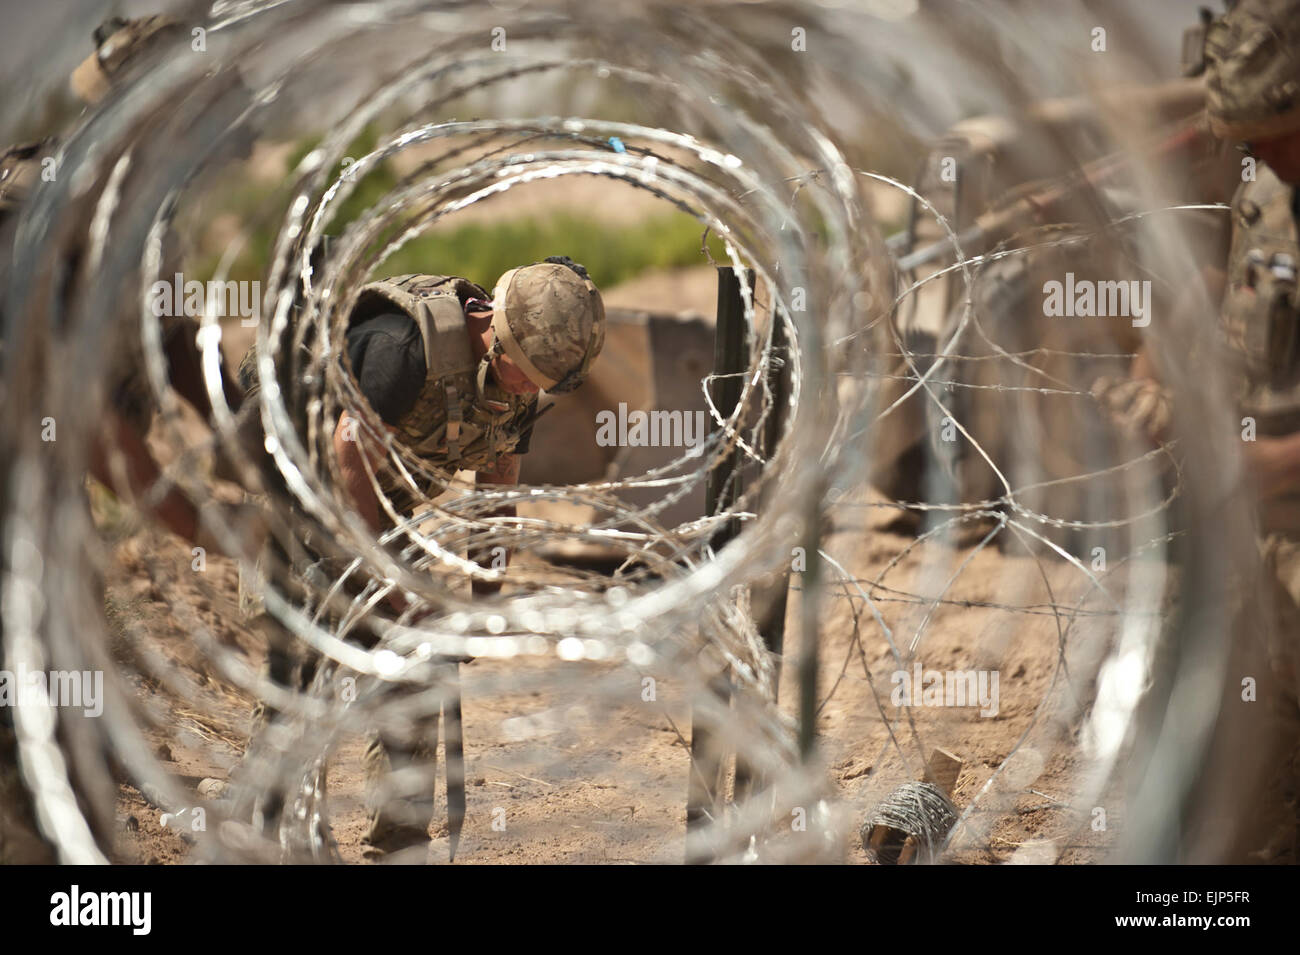 An engineer assigned to 59 Commando Squadron, Royal Engineers, secures concertina wire for a security barrier in Lashkar Gah District, Helmand province, July 25. The Engineers built the station for the Afghan Local Police, a local security force made up of handpicked individuals from the community. Stock Photo